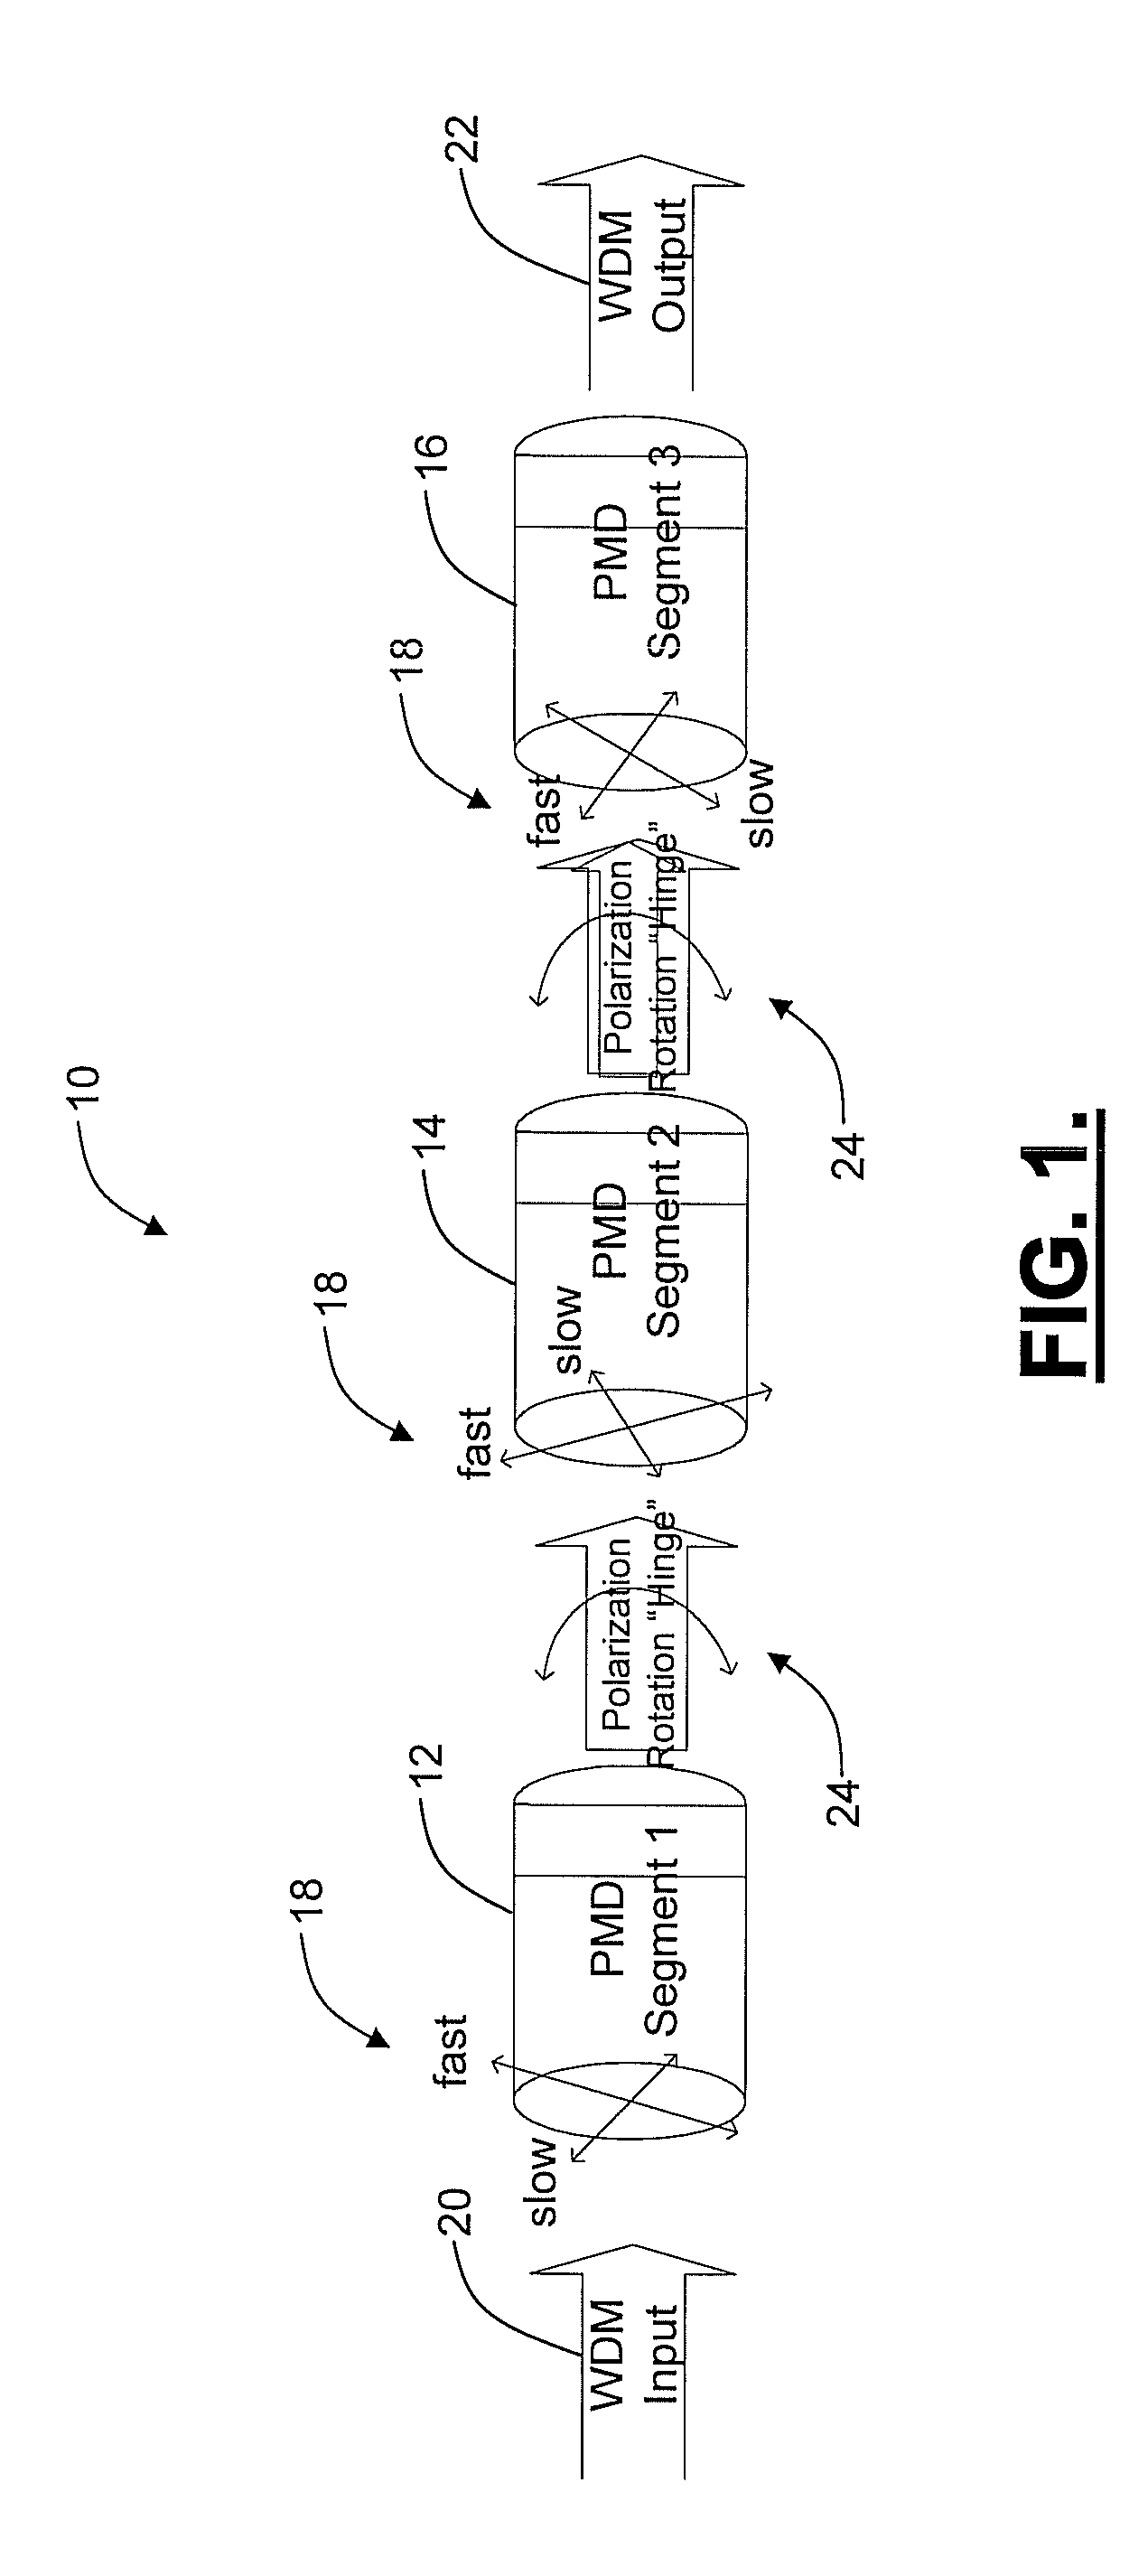 Systems and methods for the mitigation of polarization mode dispersion impairments in fiber optic links